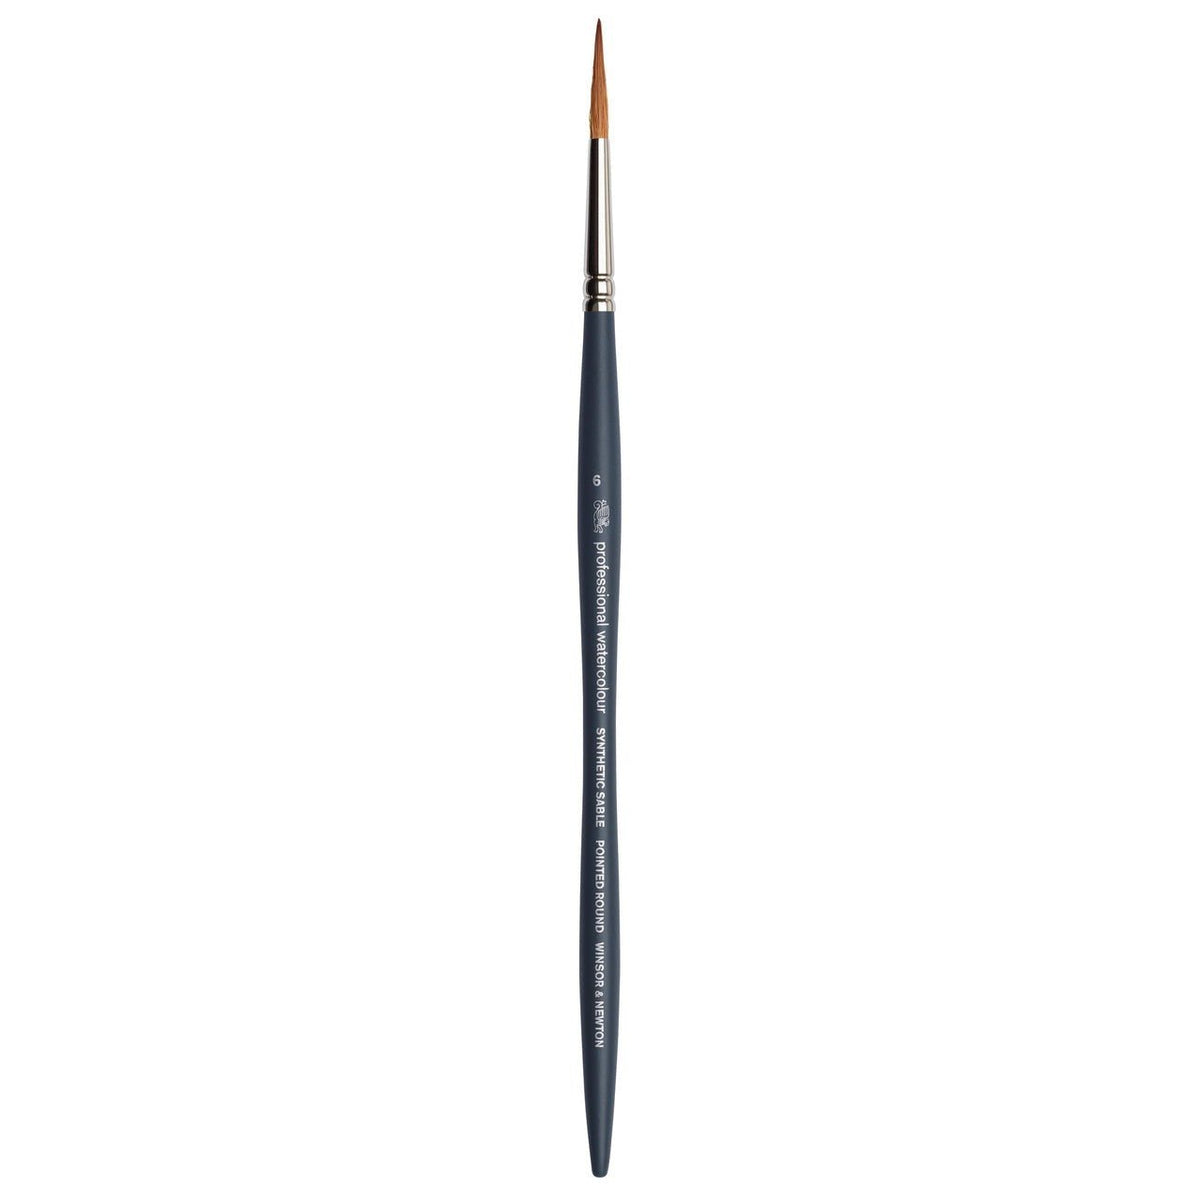 Winsor & Newton Professional Watercolor Synthetic Sable Brush - Pointed Round 6 - merriartist.com